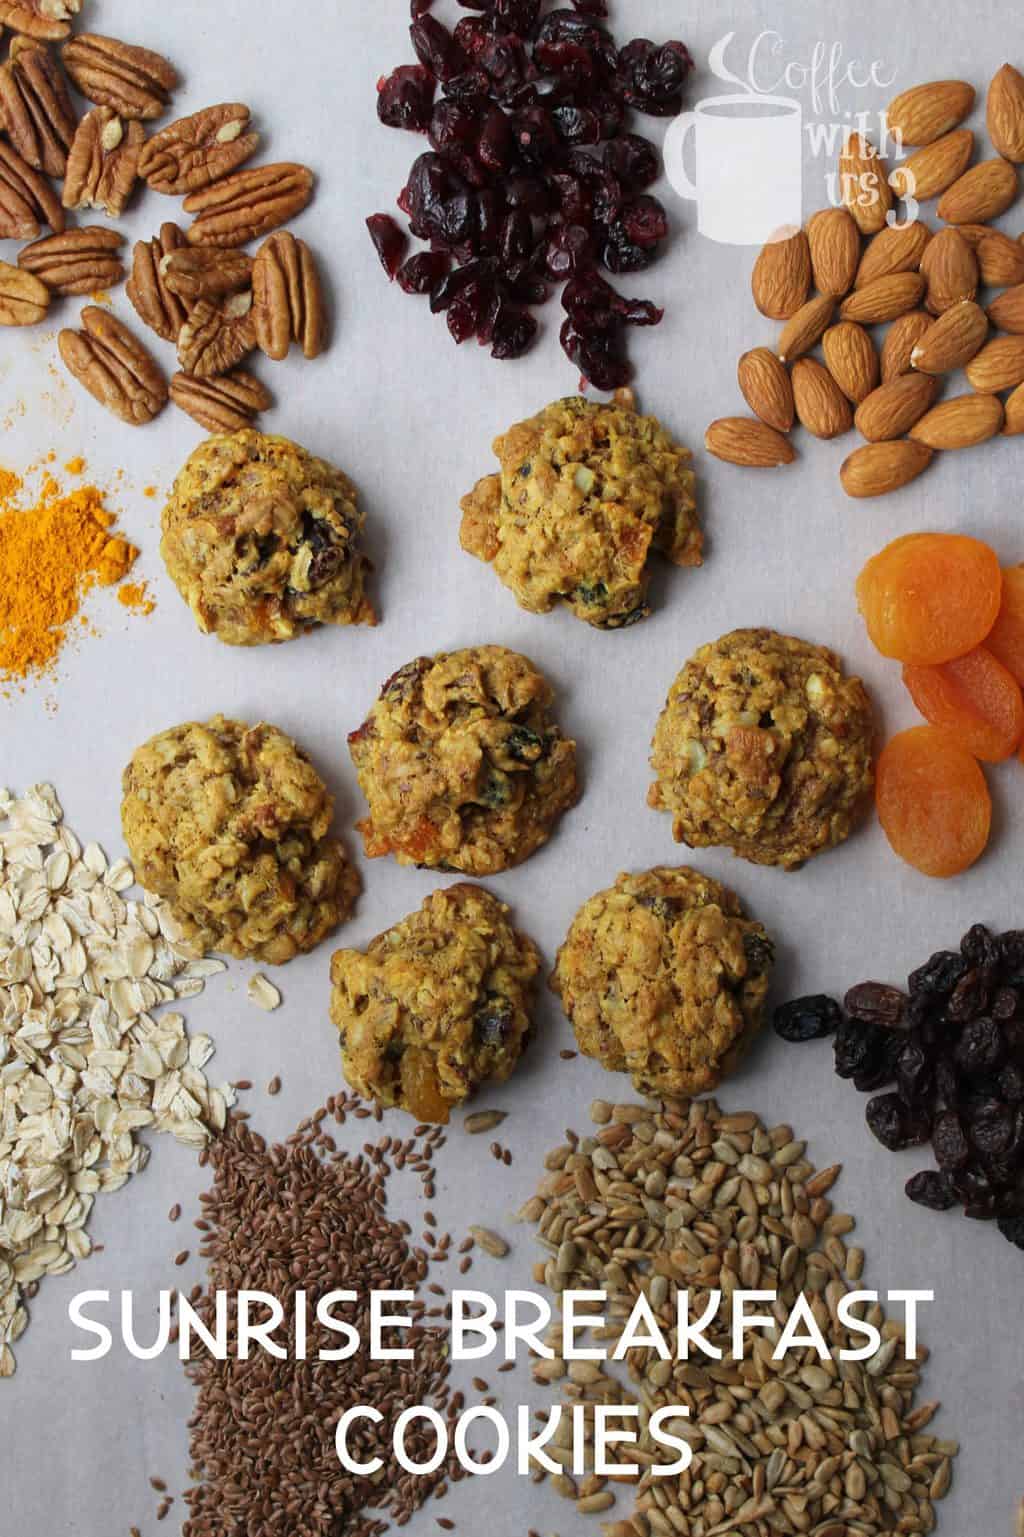 Who doesn't want to eat cookies for breakfast?  With these Sunrise Breakfast Cookies, you can!  Packed with oats, nuts, seeds, dried fruit, and more, they're very filling!